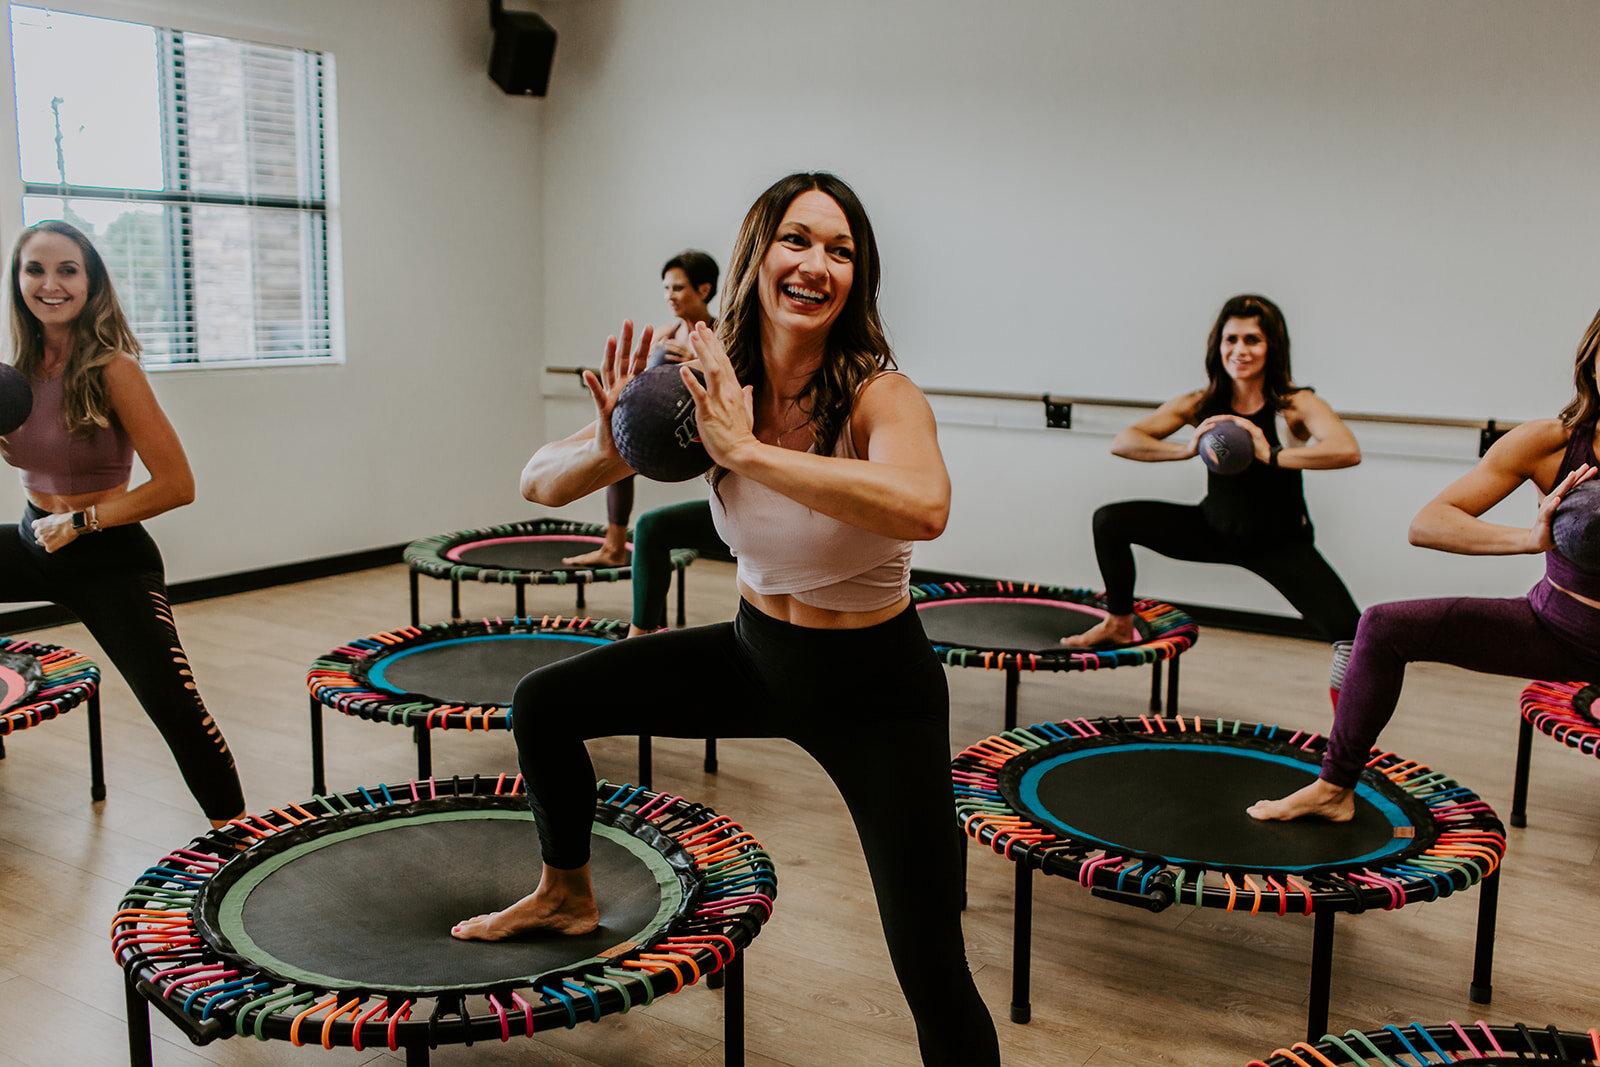 Bounce! — The Sand Barre